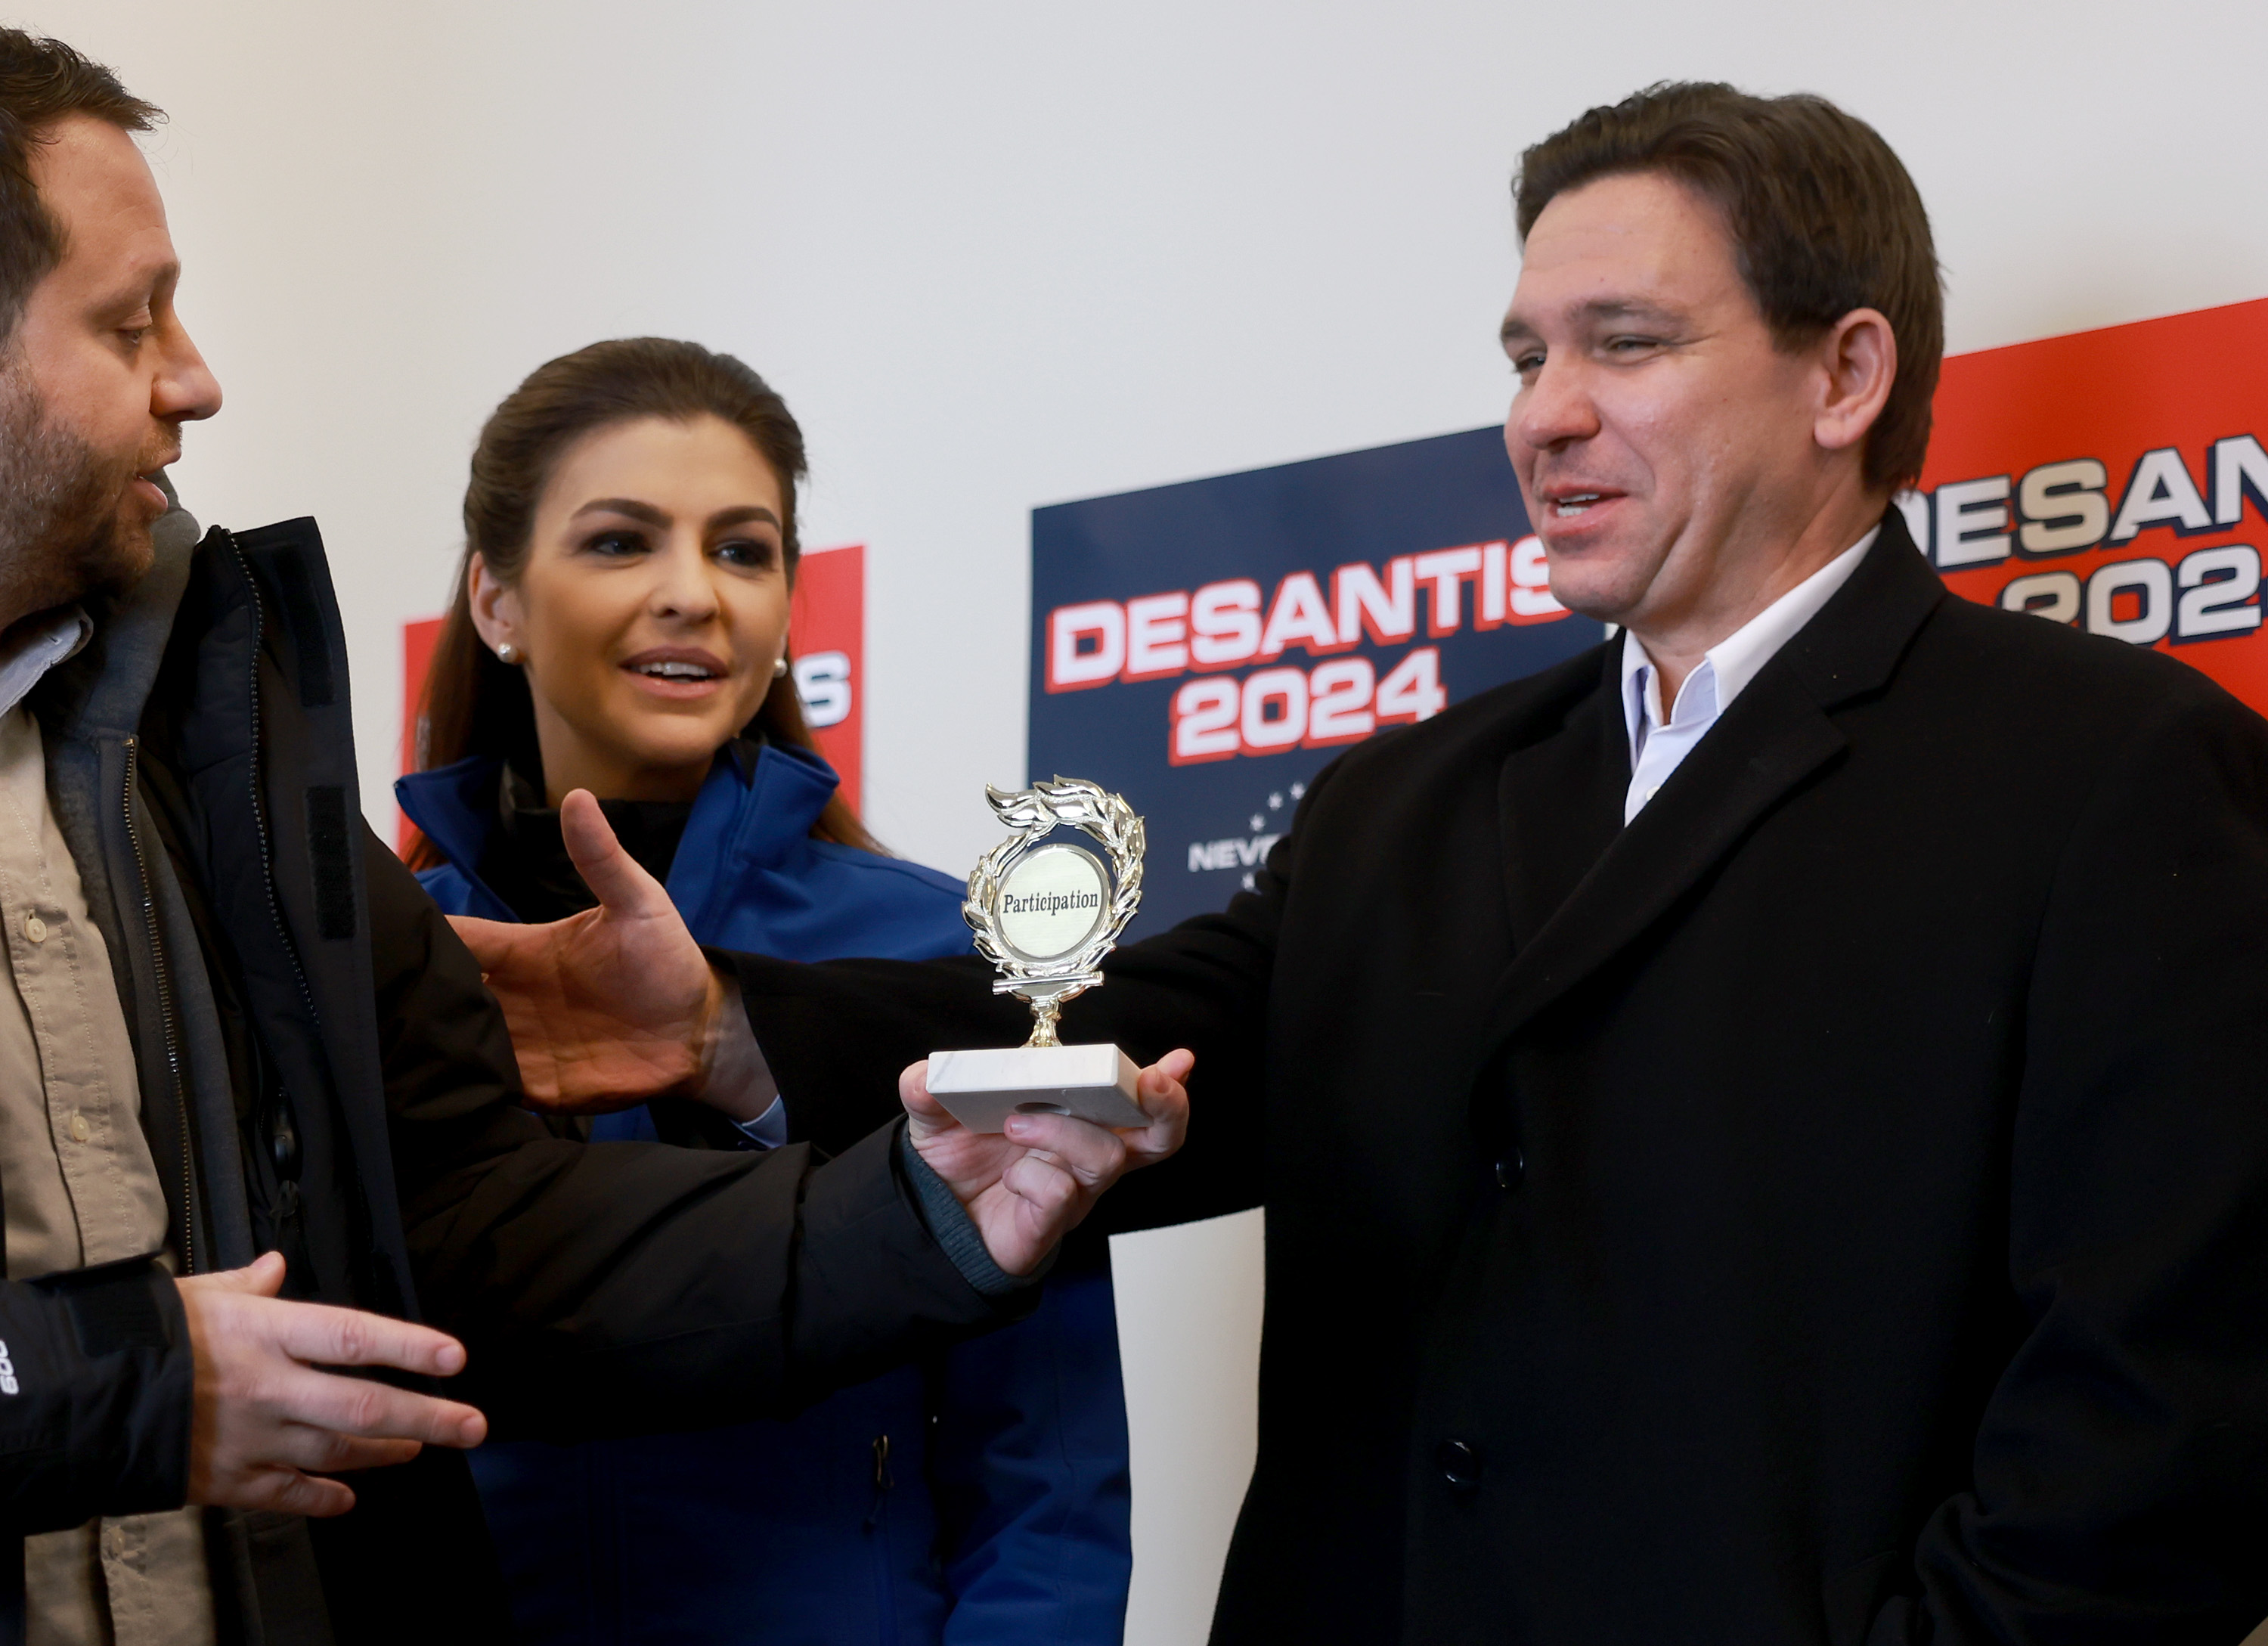 A person tries to give Florida Gov. Ron DeSantis a participation trophy during a campaign stop in Atlantic, Iowa, on January 13.